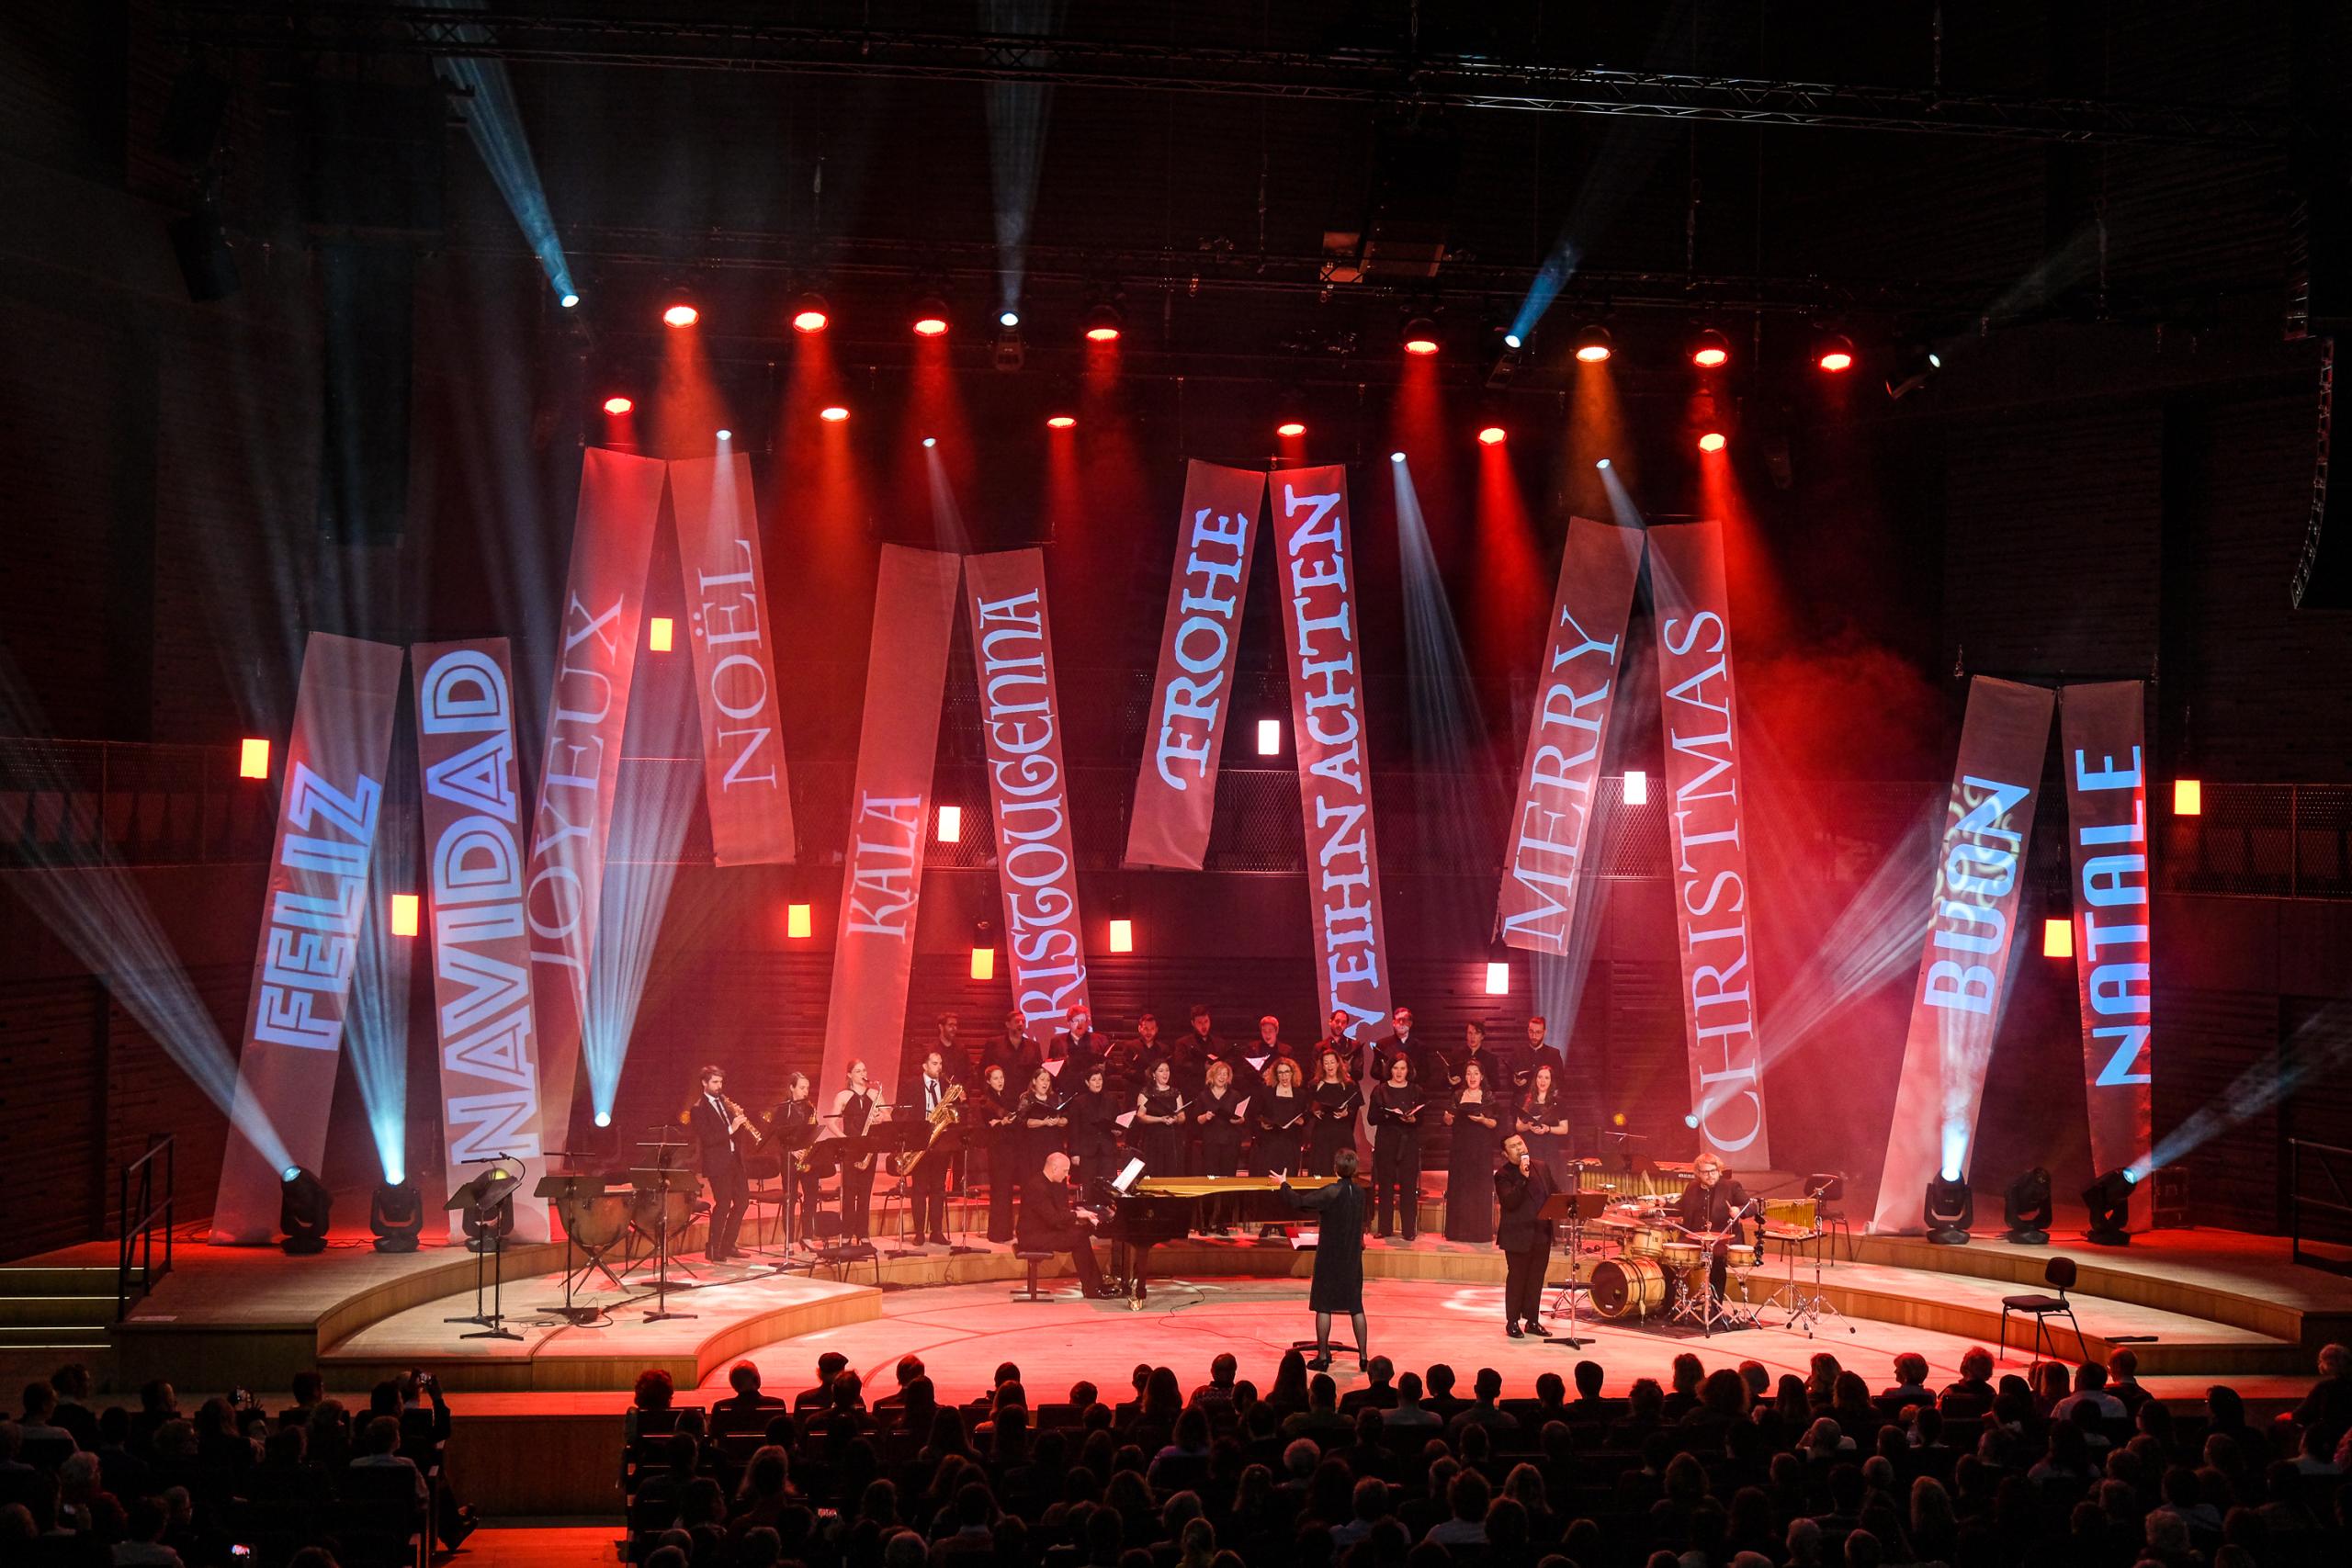 Musicians on the stage of the Isarphilharmonie with Christmas stage design